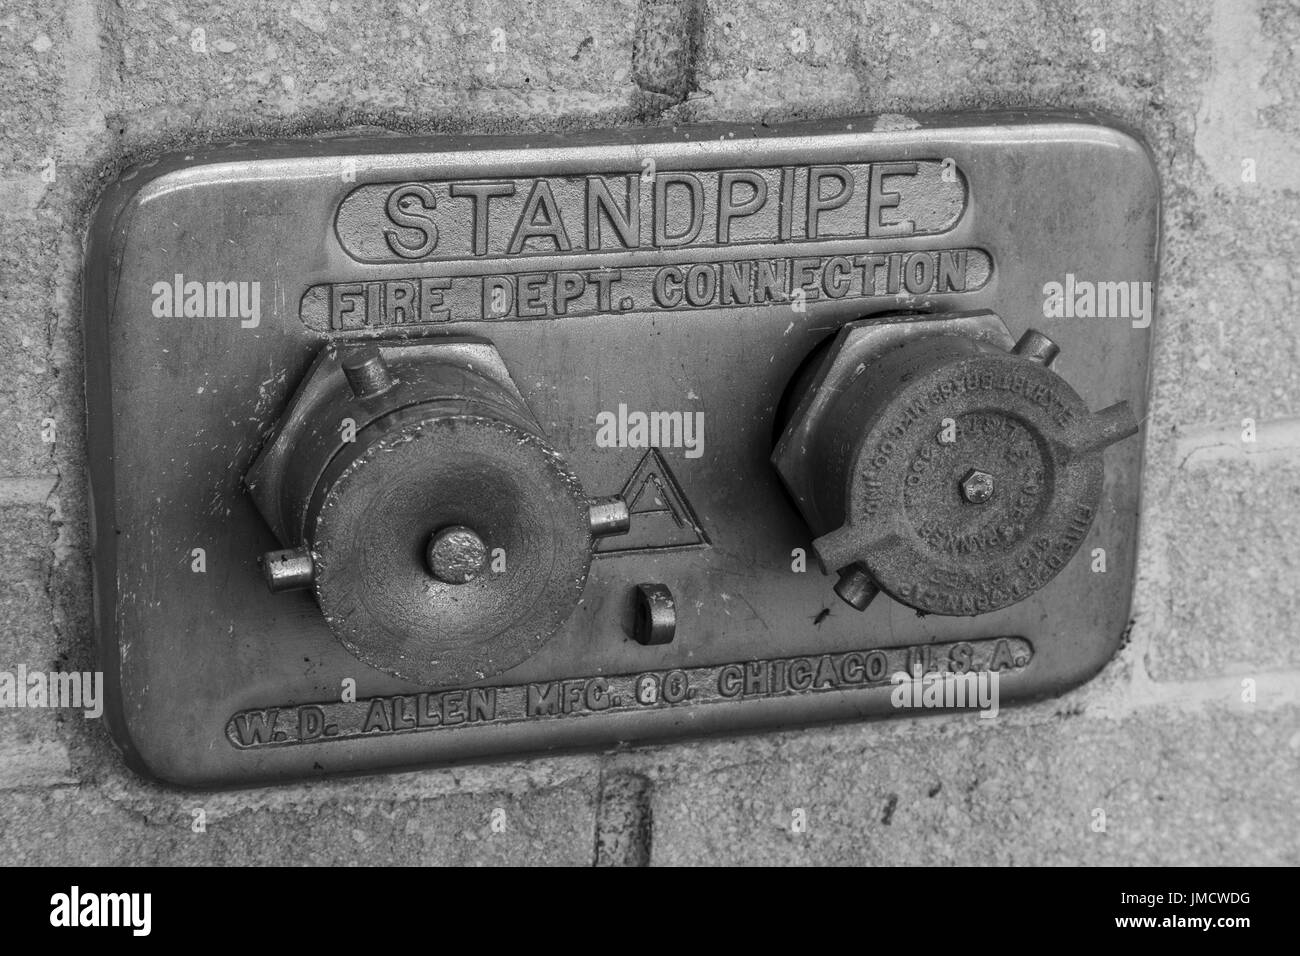 Fire dept standpipe connection Stock Photo